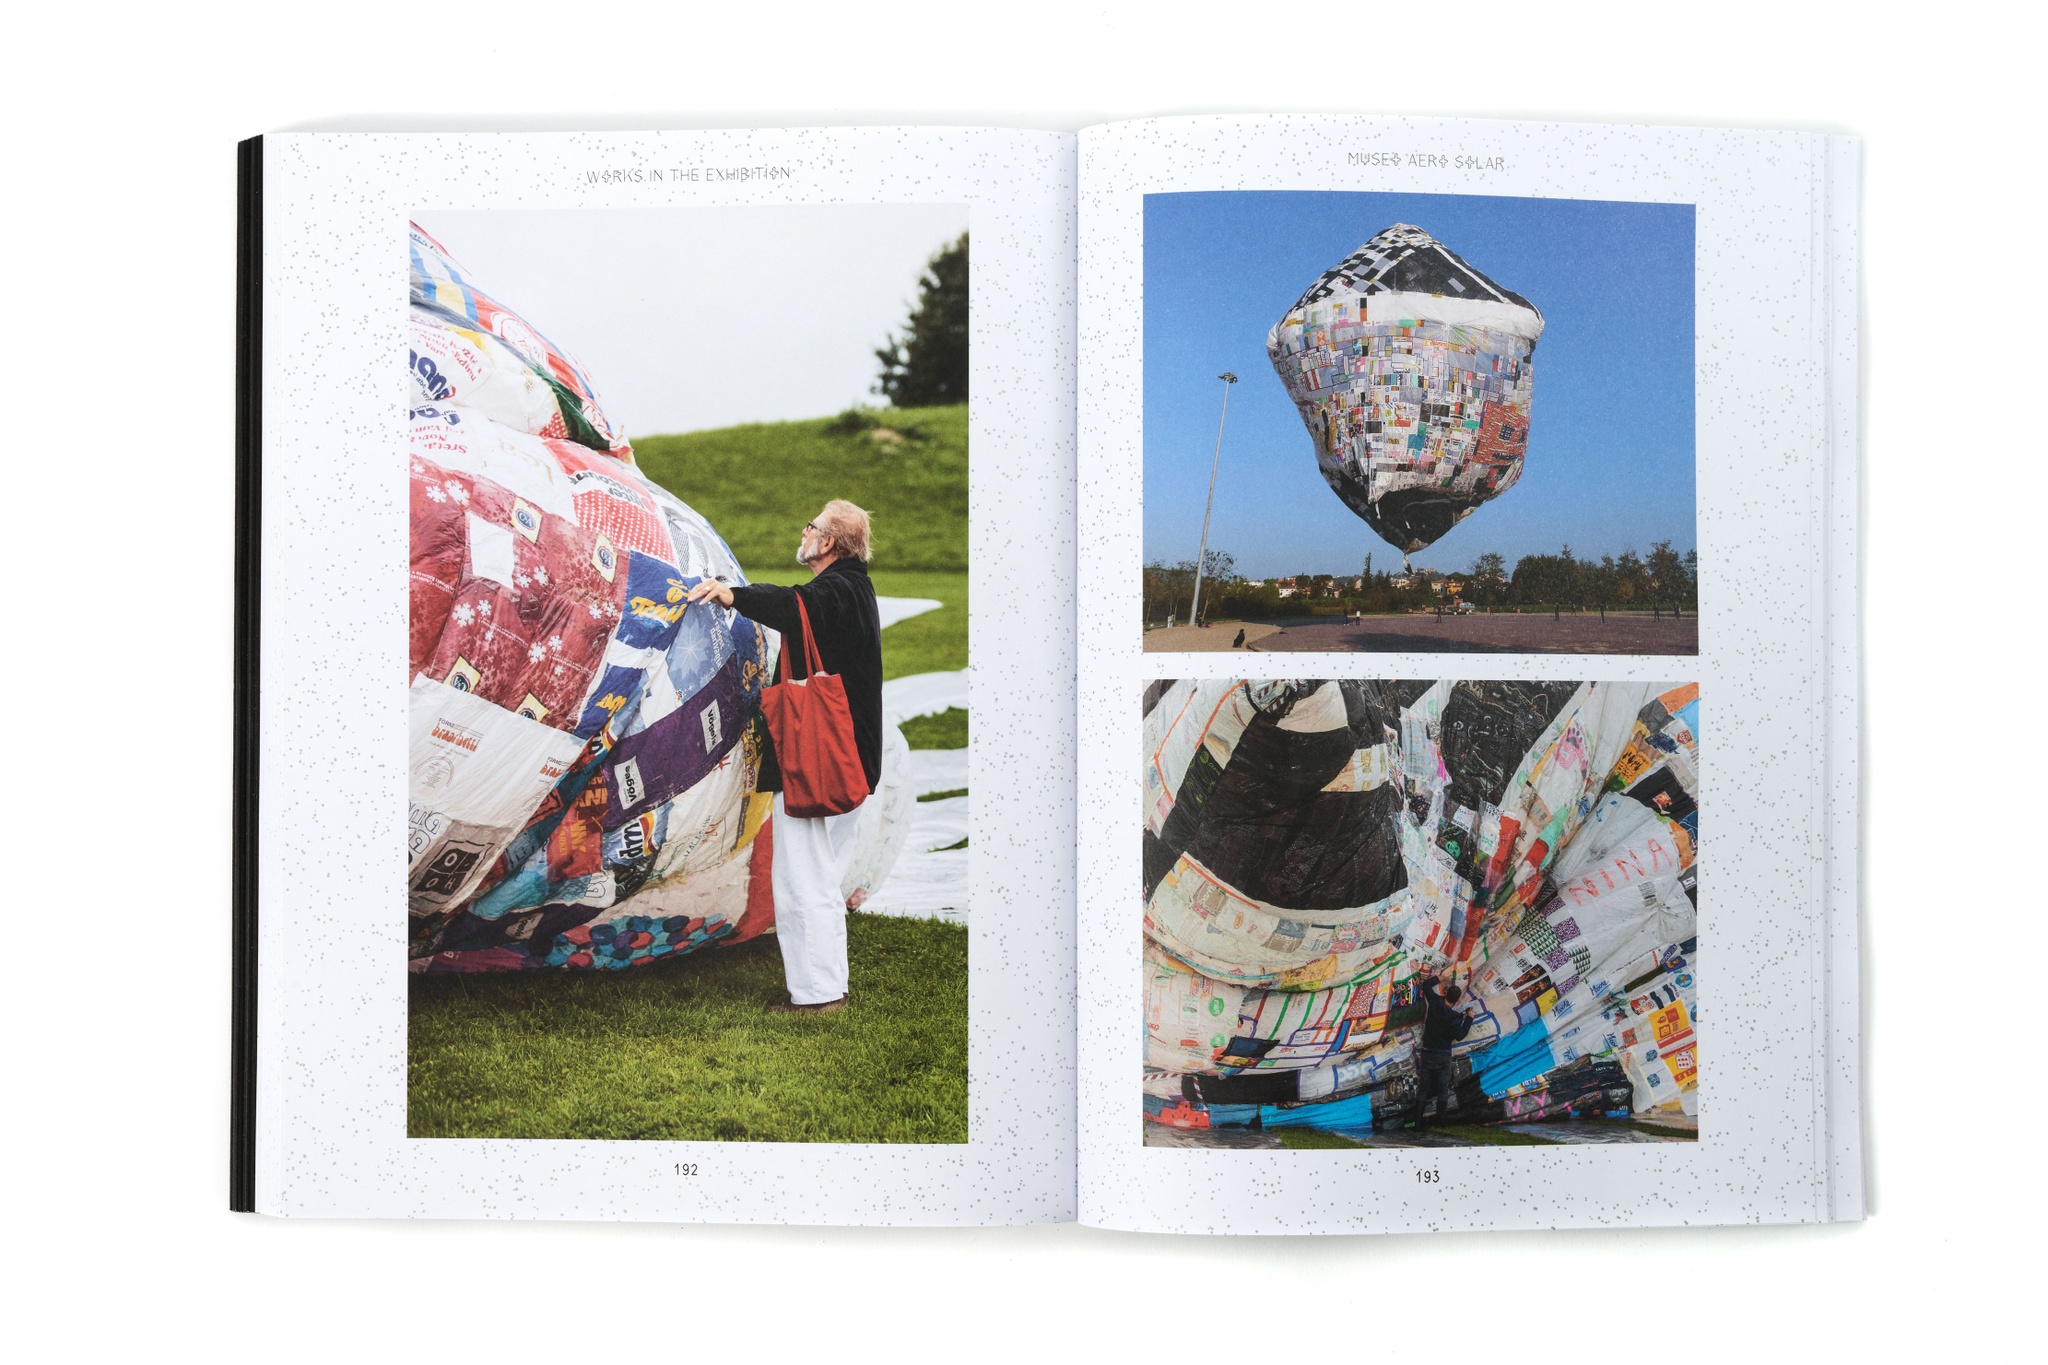 A book open on a white background. The pages display colorful images of hot air balloons pieced together from recycled paper bags. 